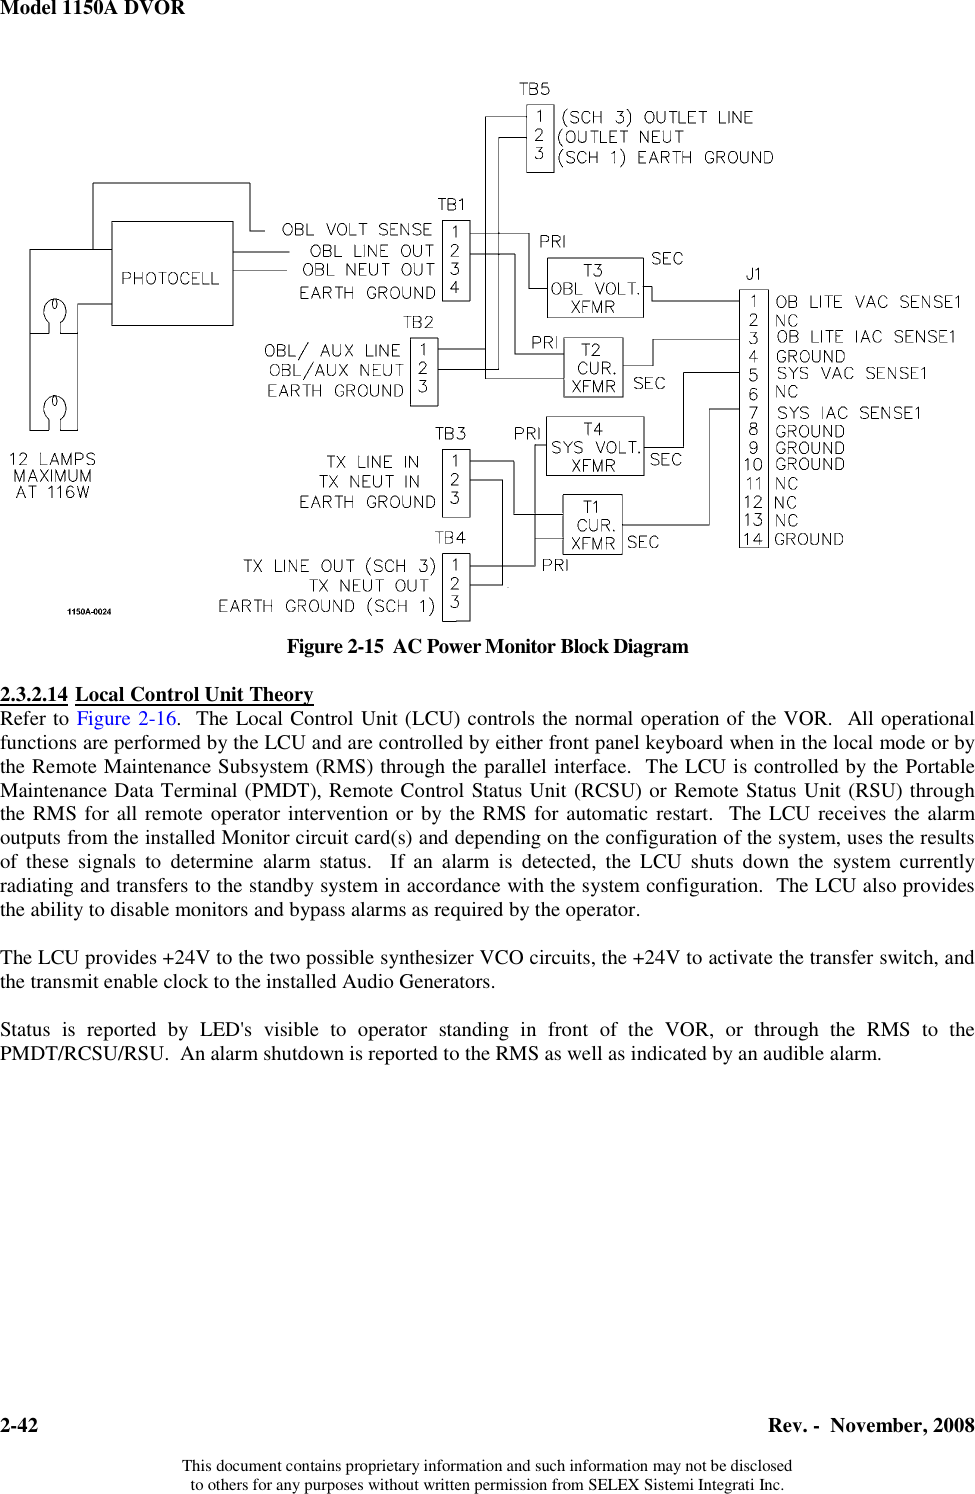 Model 1150A DVOR  2-42  Rev. -  November, 2008  This document contains proprietary information and such information may not be disclosed to others for any purposes without written permission from SELEX Sistemi Integrati Inc. Figure 2-15  AC Power Monitor Block Diagram  2.3.2.14 Local Control Unit TheoryRefer to Figure 2-16.The Local Control Unit (LCU) controls the normal operation of the VOR.  All operational functions are performed by the LCU and are controlled by either front panel keyboard when in the local mode or by the Remote Maintenance Subsystem (RMS) through the parallel interface.  The LCU is controlled by the Portable Maintenance Data Terminal (PMDT), Remote Control Status Unit (RCSU) or Remote Status Unit (RSU) through the RMS for all remote operator intervention or by the RMS for automatic restart.  The LCU receives the alarm outputs from the installed Monitor circuit card(s) and depending on the configuration of the system, uses the results of these signals to determine alarm status.  If an alarm is detected, the LCU shuts down the system currently radiating and transfers to the standby system in accordance with the system configuration.  The LCU also provides the ability to disable monitors and bypass alarms as required by the operator.  The LCU provides +24V to the two possible synthesizer VCO circuits, the +24V to activate the transfer switch, and the transmit enable clock to the installed Audio Generators.  Status is reported by LED&apos;s visible to operator standing in front of the VOR, or through the RMS to the PMDT/RCSU/RSU.  An alarm shutdown is reported to the RMS as well as indicated by an audible alarm.  